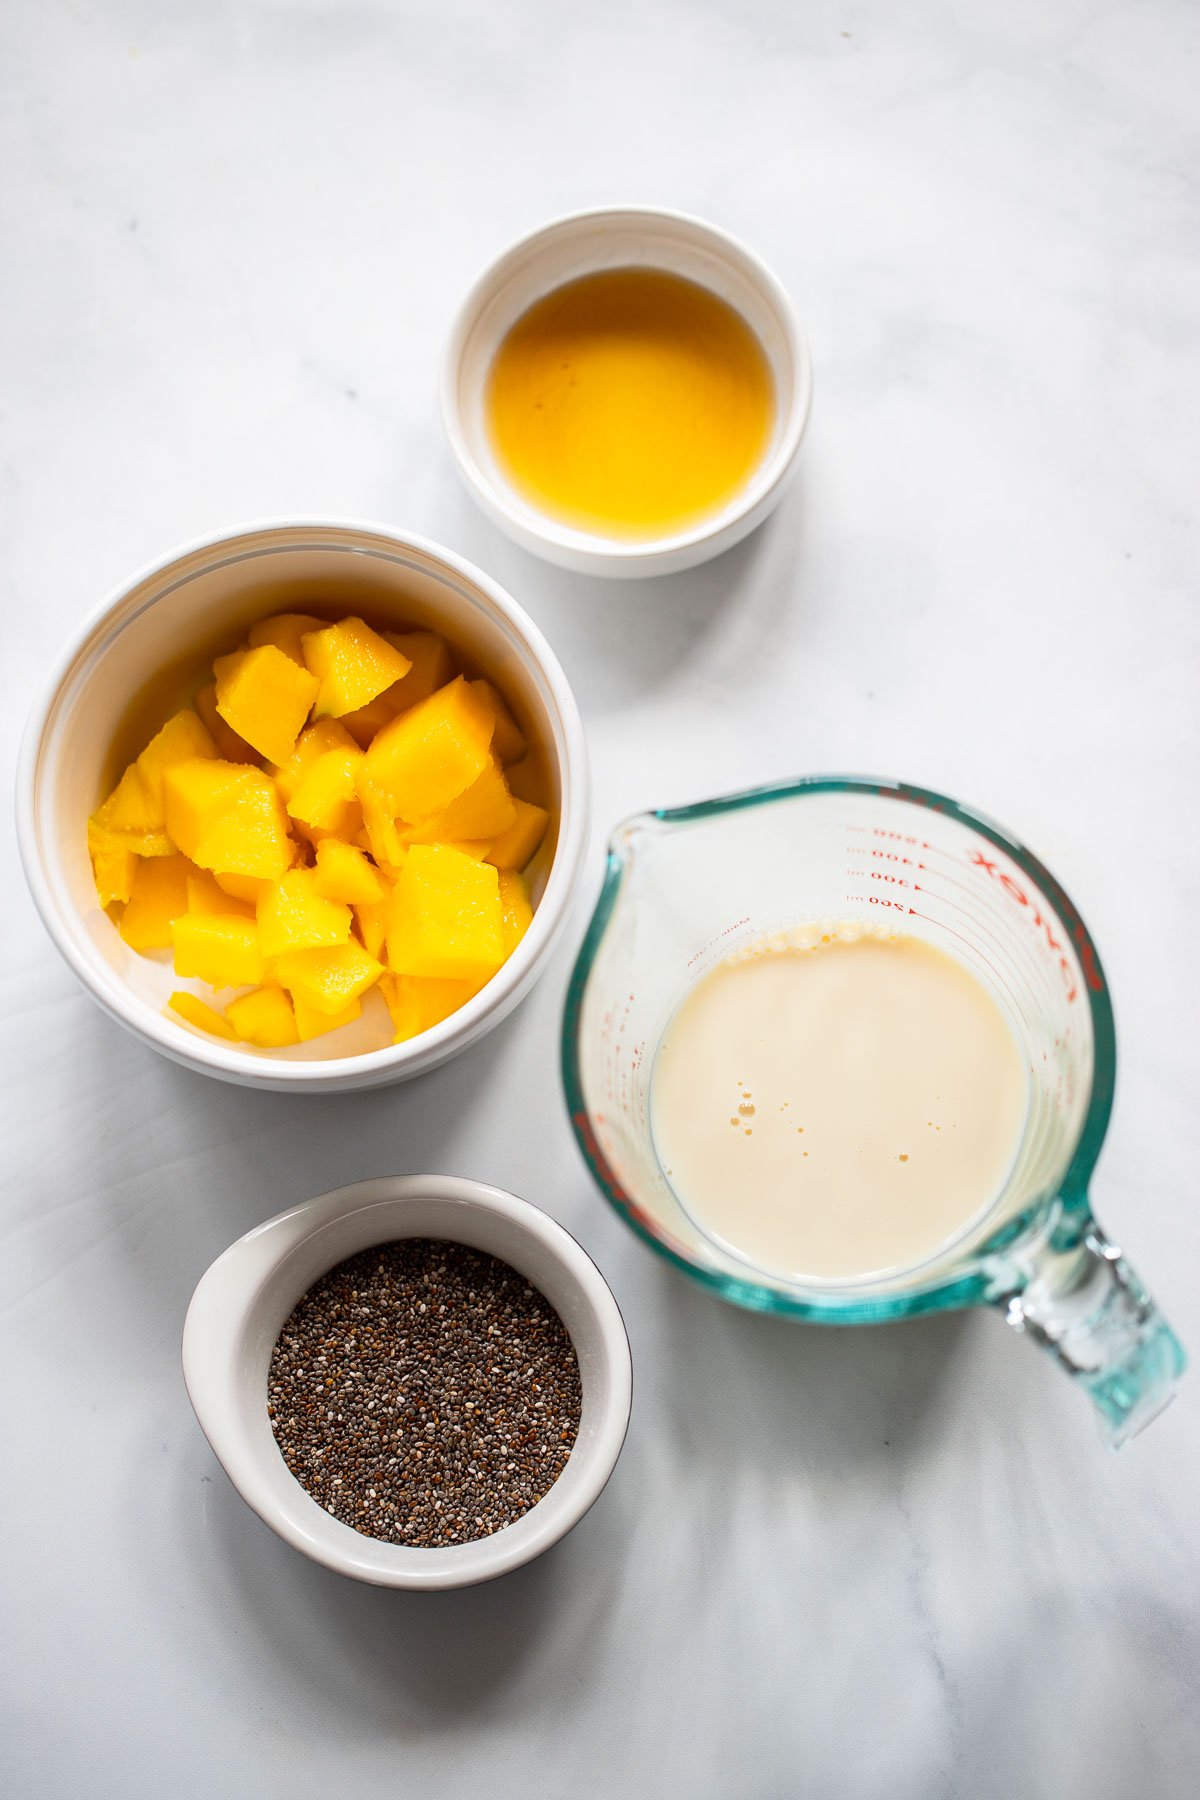 mango chia seed pudding ingredients in small dishes on a white background.